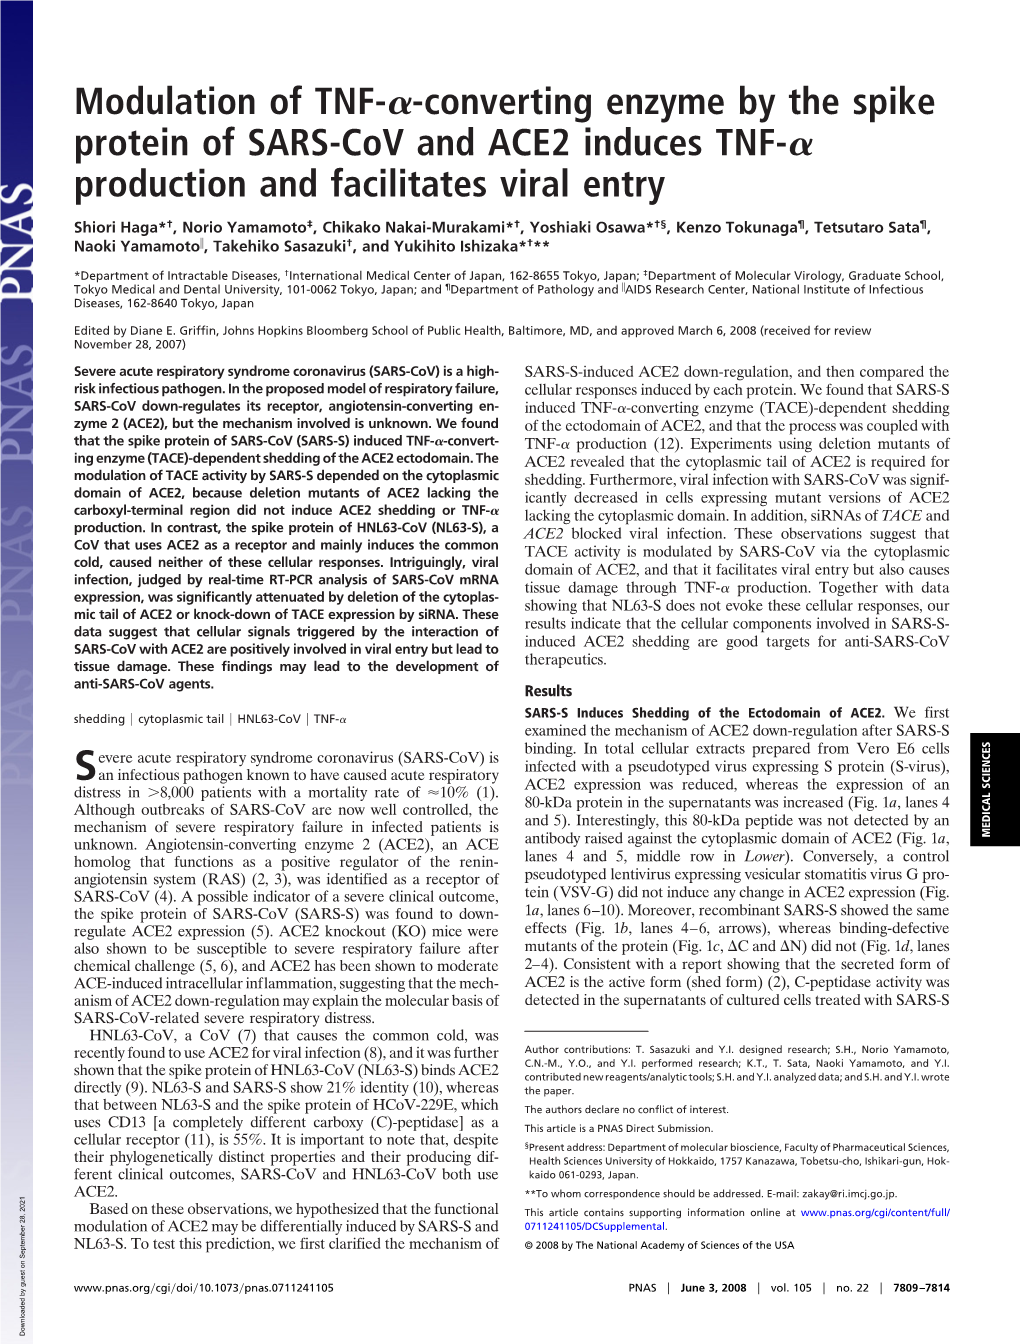 Converting Enzyme by the Spike Protein of SARS-Cov and ACE2 Induces TNF-␣ Production and Facilitates Viral Entry